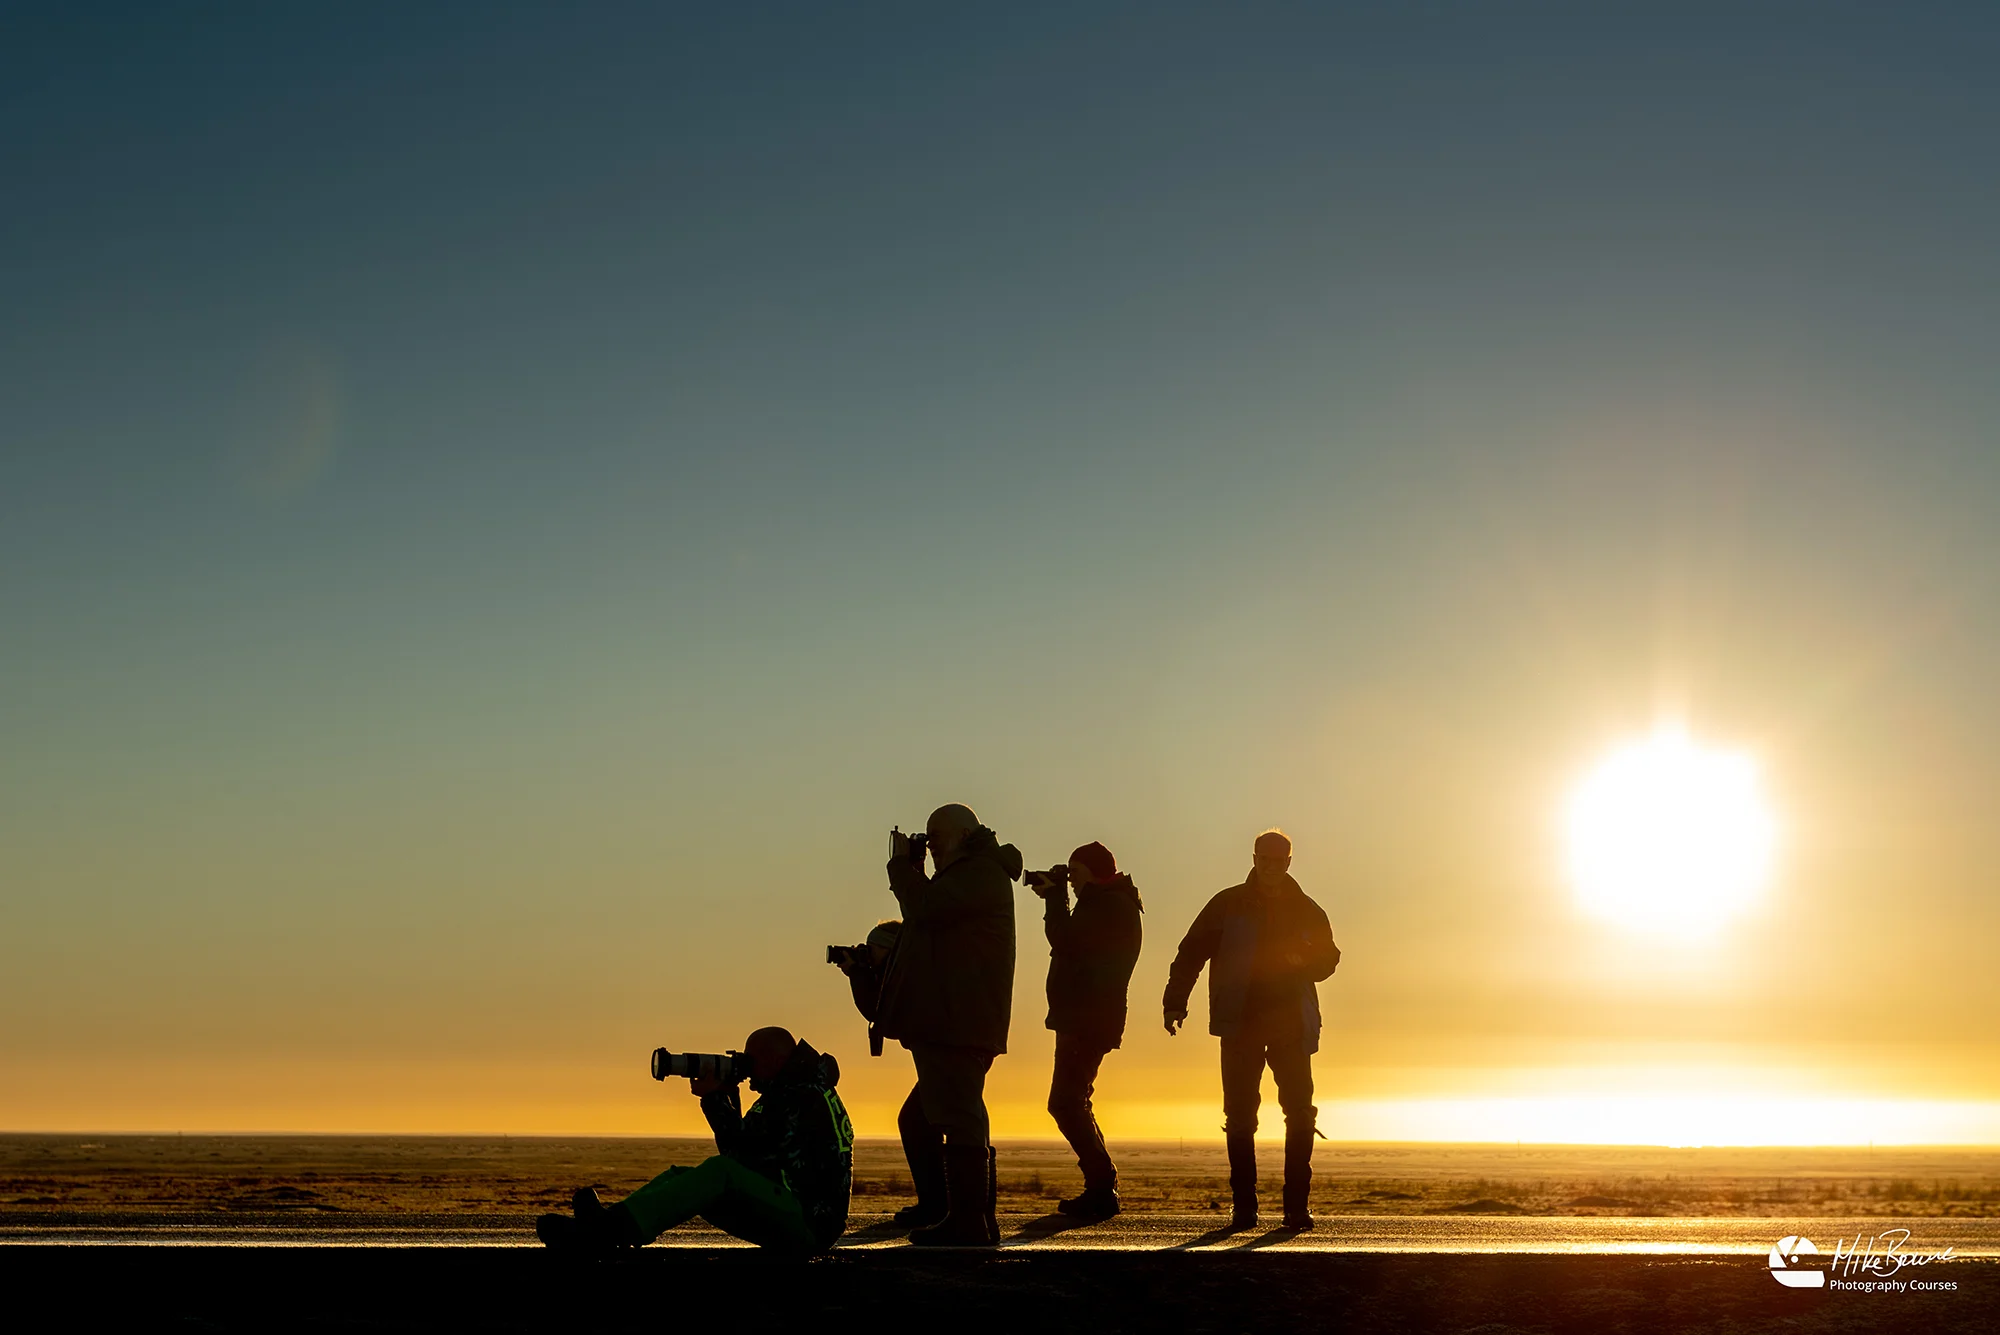 Five photographers with cameras raised standing in road at sunrise